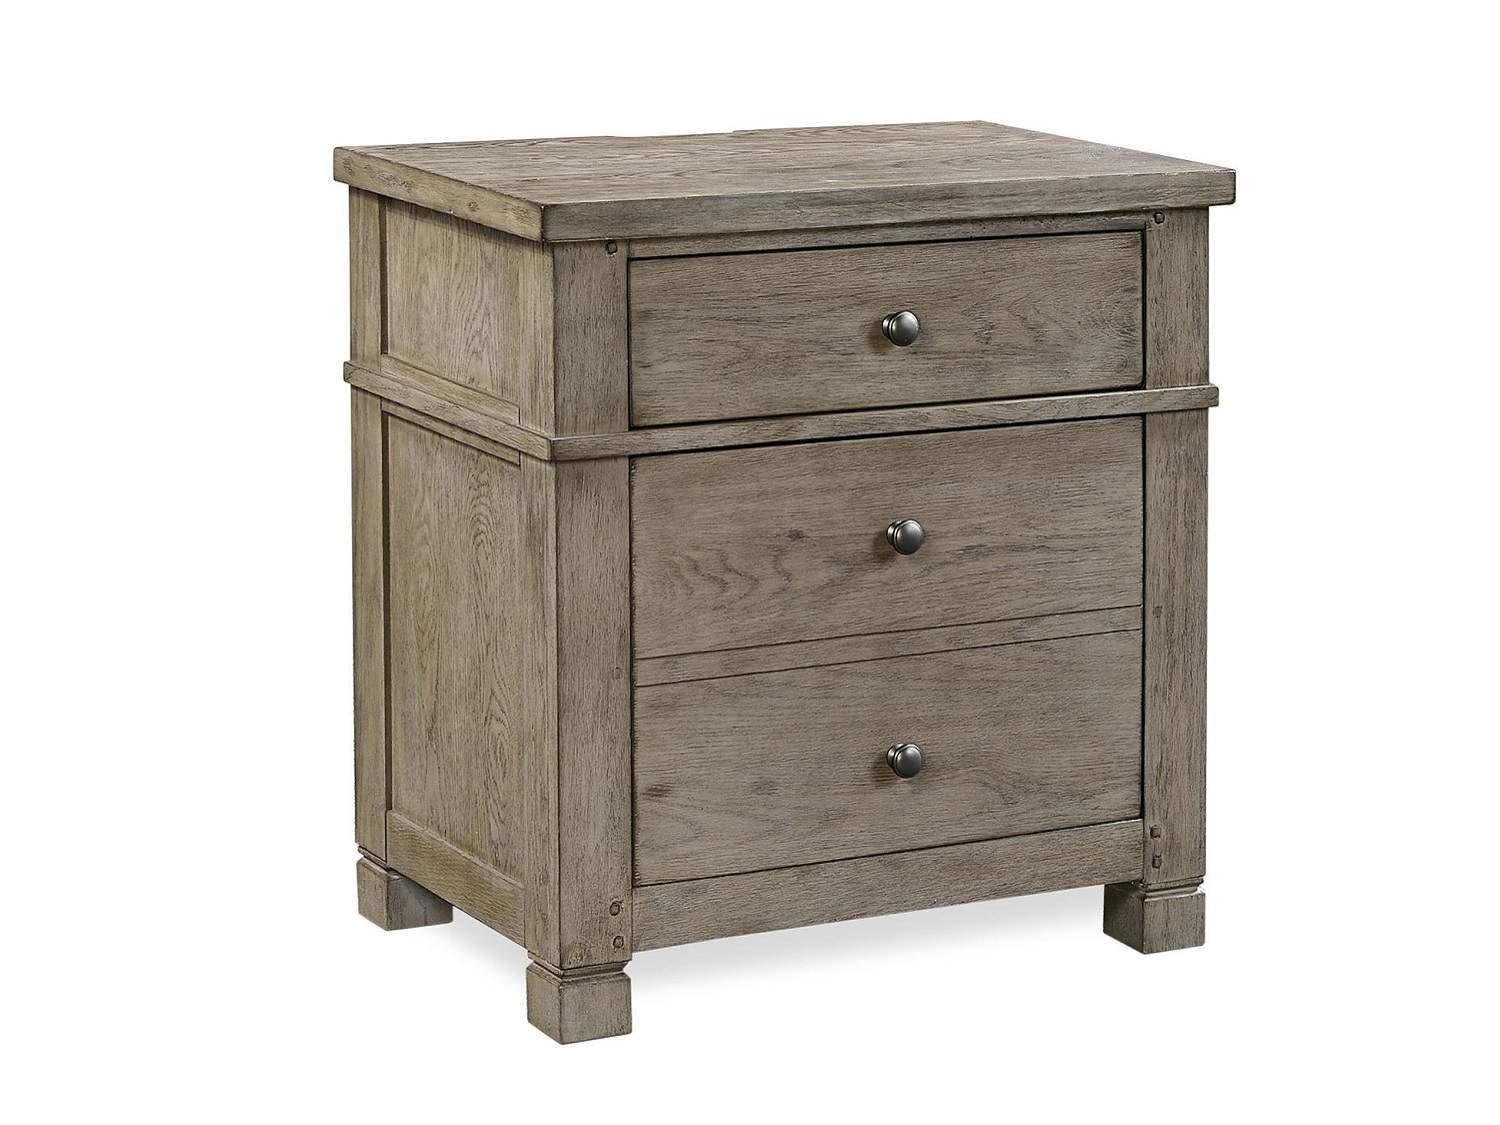 SUMTER Nightstand with Drawers